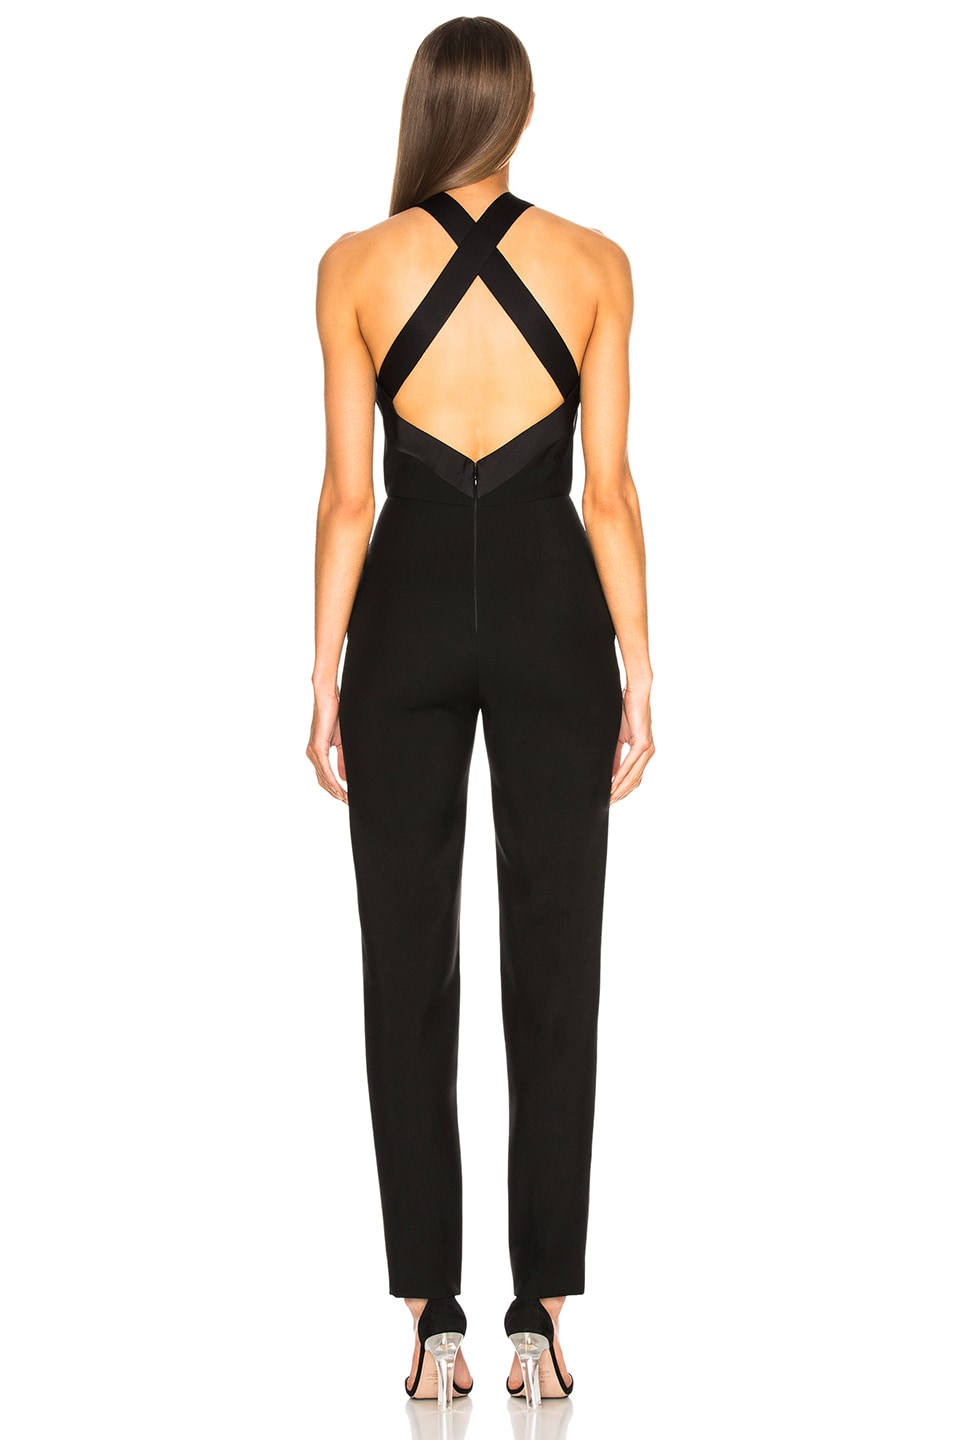 Givenchy Bow Front Cross Back Jumpsuit in Black | FWRD